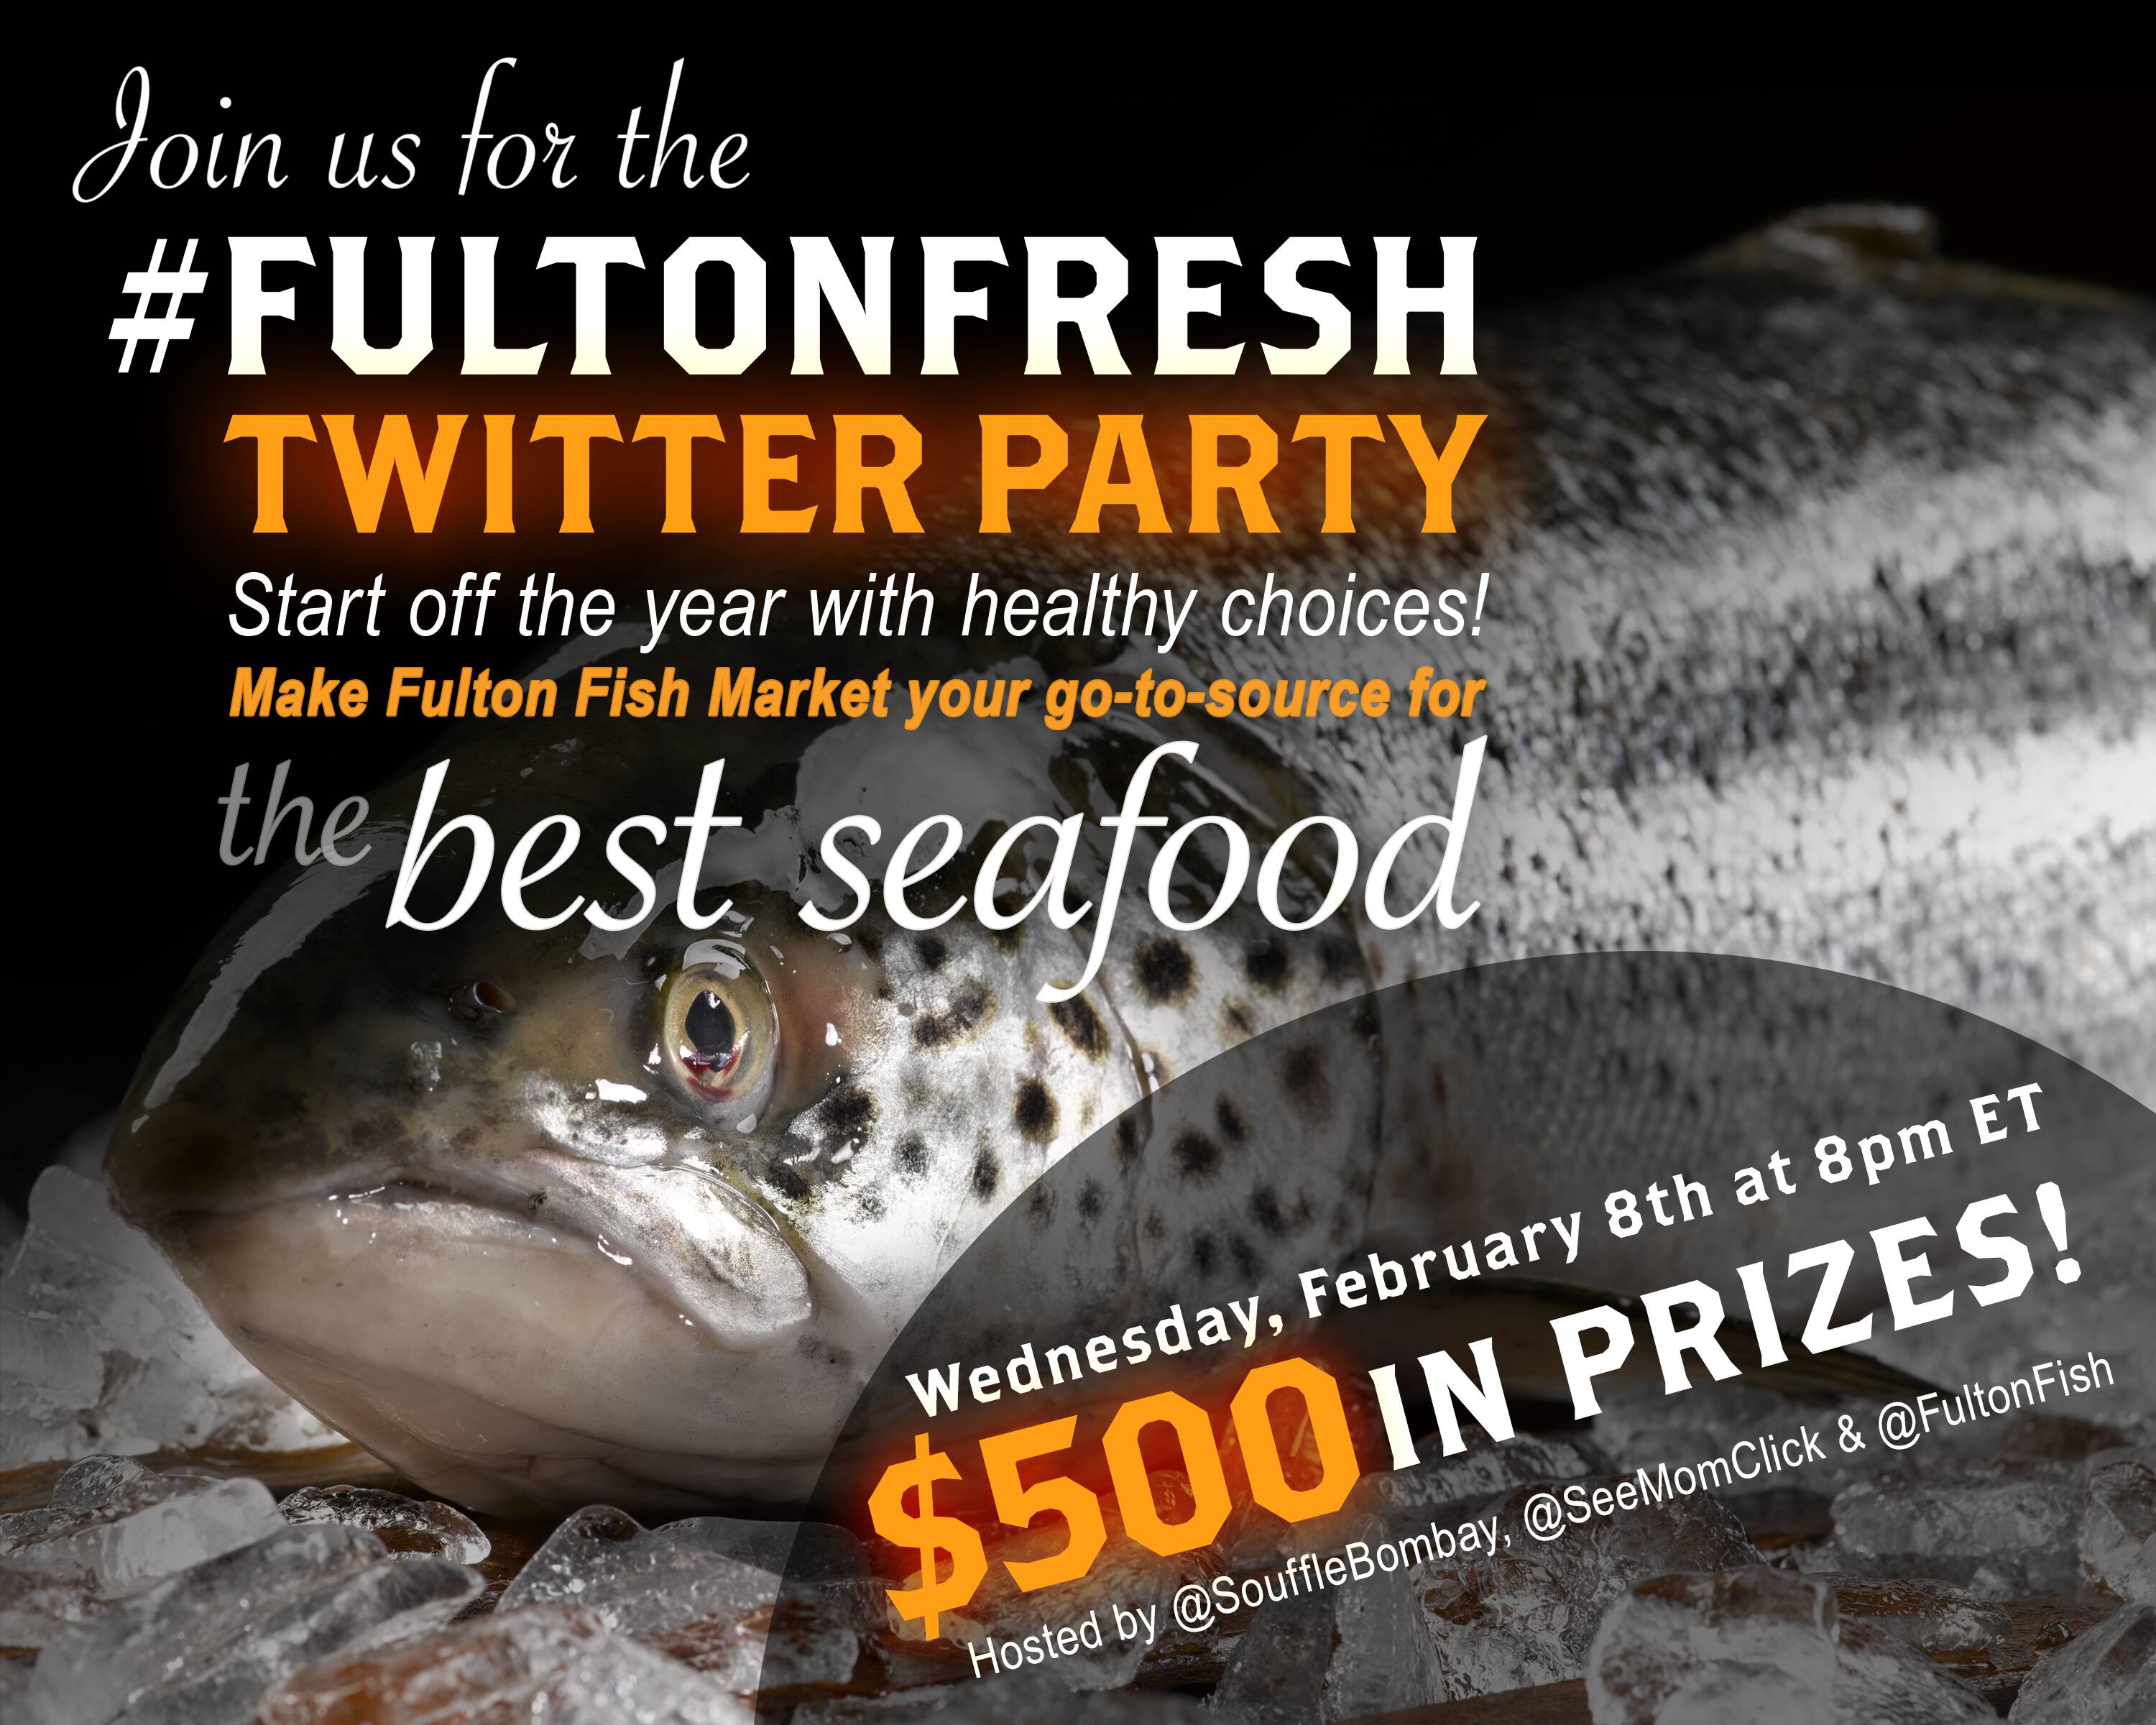 RSVP here for the #FultonFresh Twitter Party at 8pm ET on Febraury 8. Seafood just got a WHOLE lot fresher (and we have $500 in prizes)!